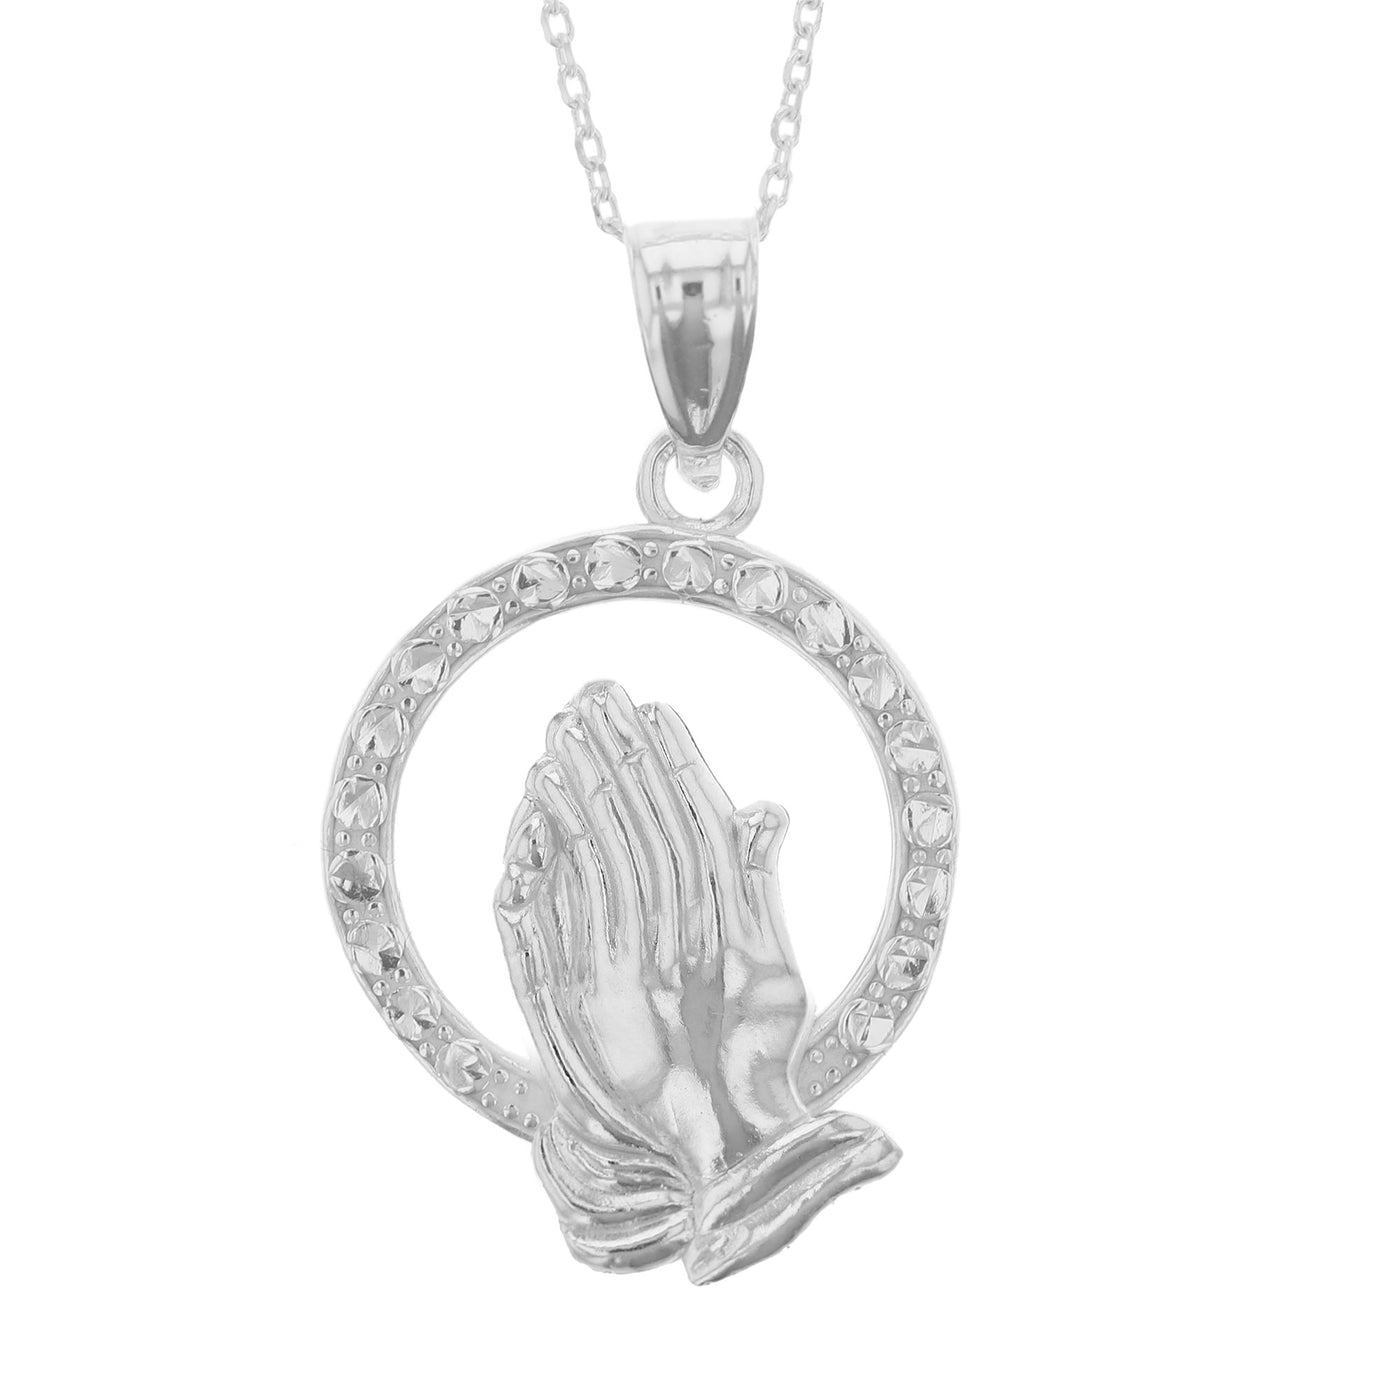 Rebecca Sloane Sterling Silver Praying hands Necklace